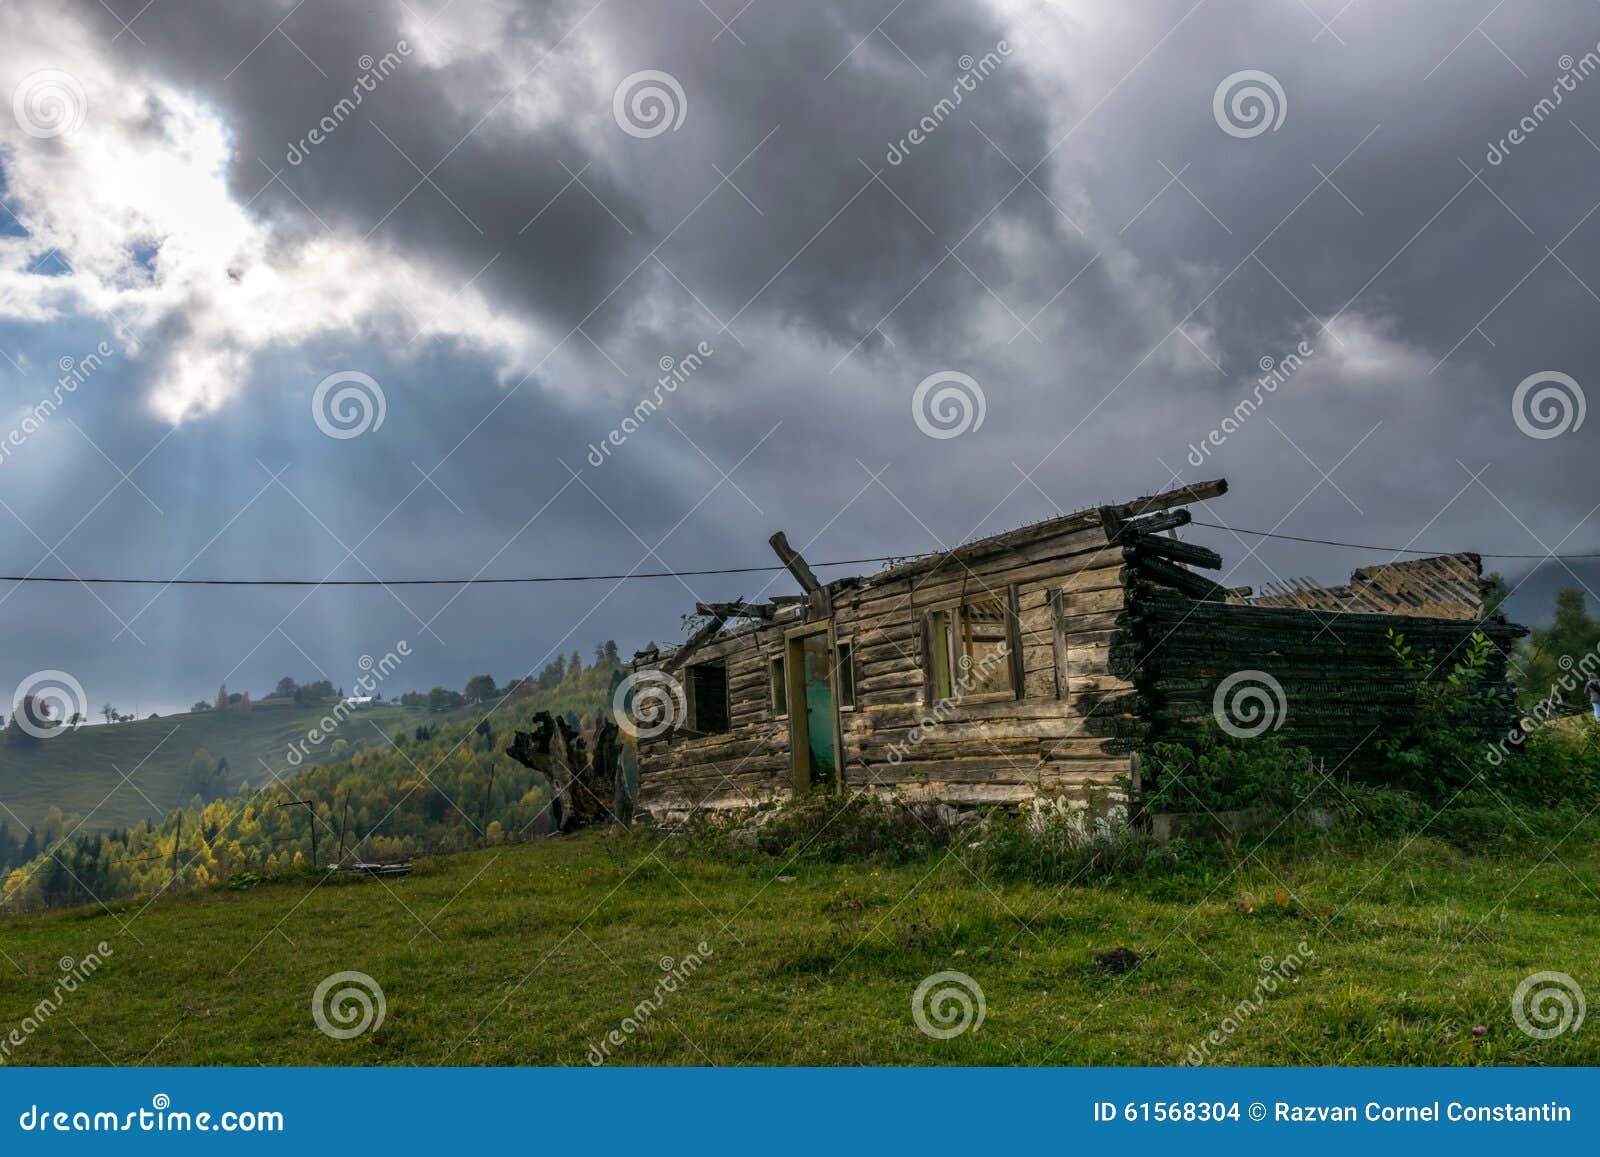 Old Burned and Abandoned House in a Mountain Landscape Stock Photo ...